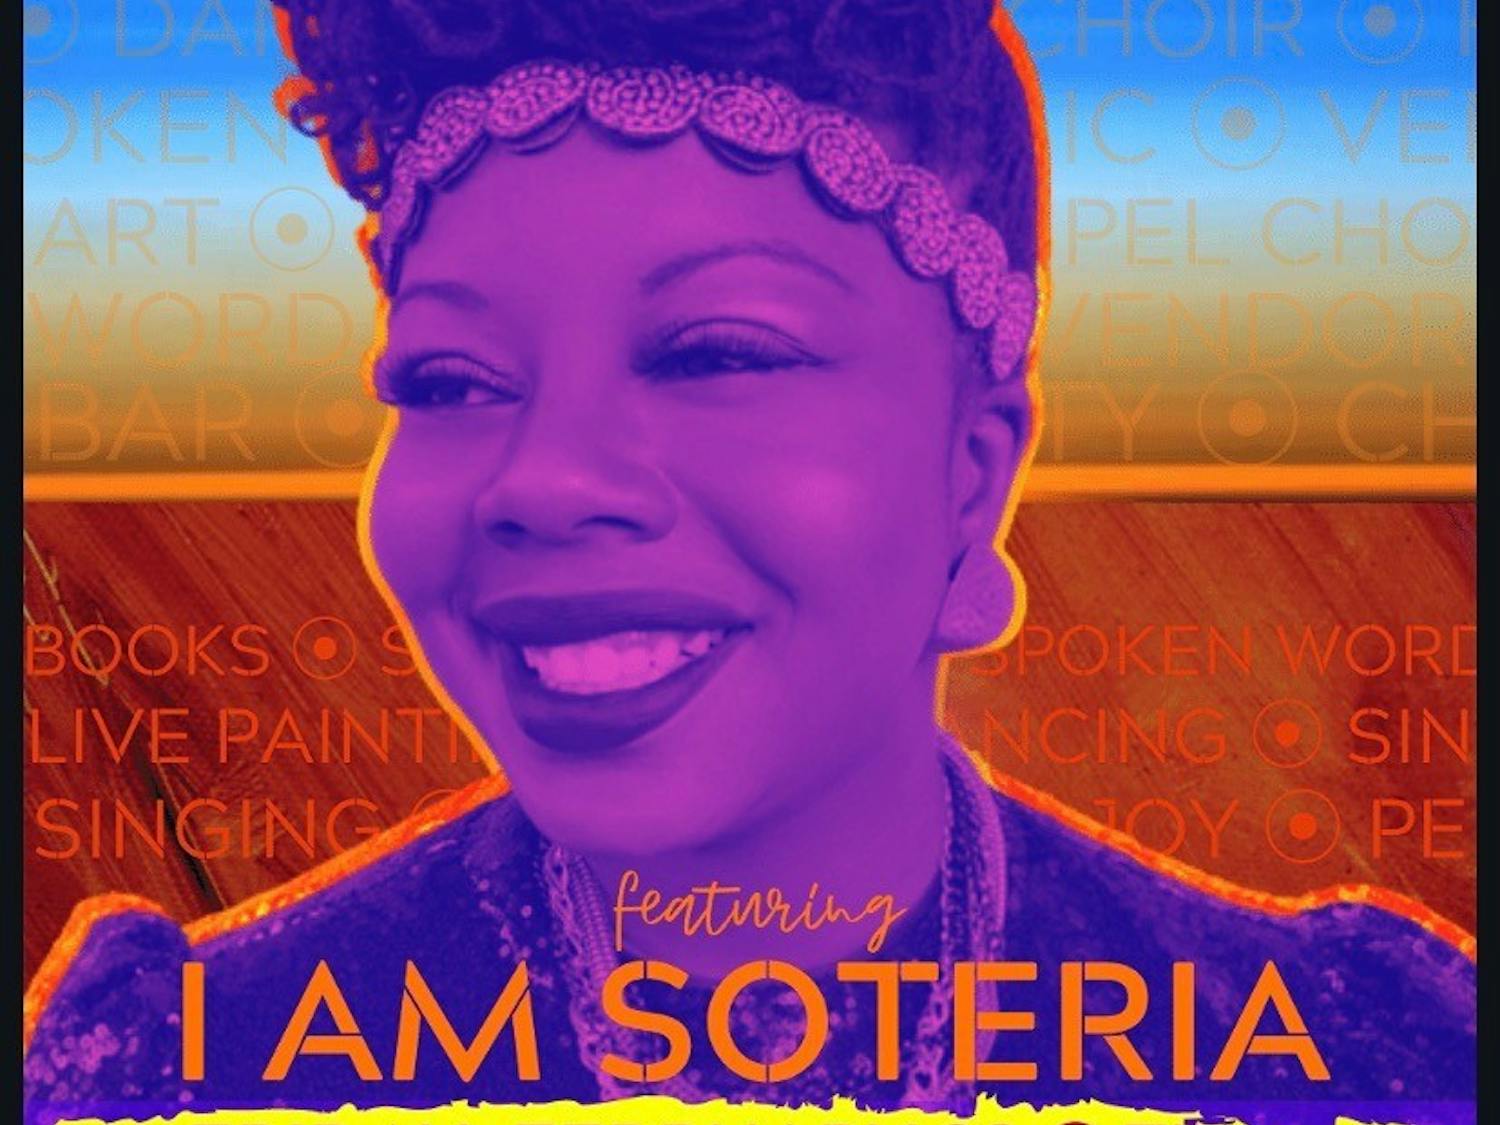 Soteria Shepperson organized the event ‘Black Friday' as part of her performance platform “I Am Soteria”. Shepperson focuses on social issues like racism and equality at her events. Photo courtesy of Soteria Shepperson.